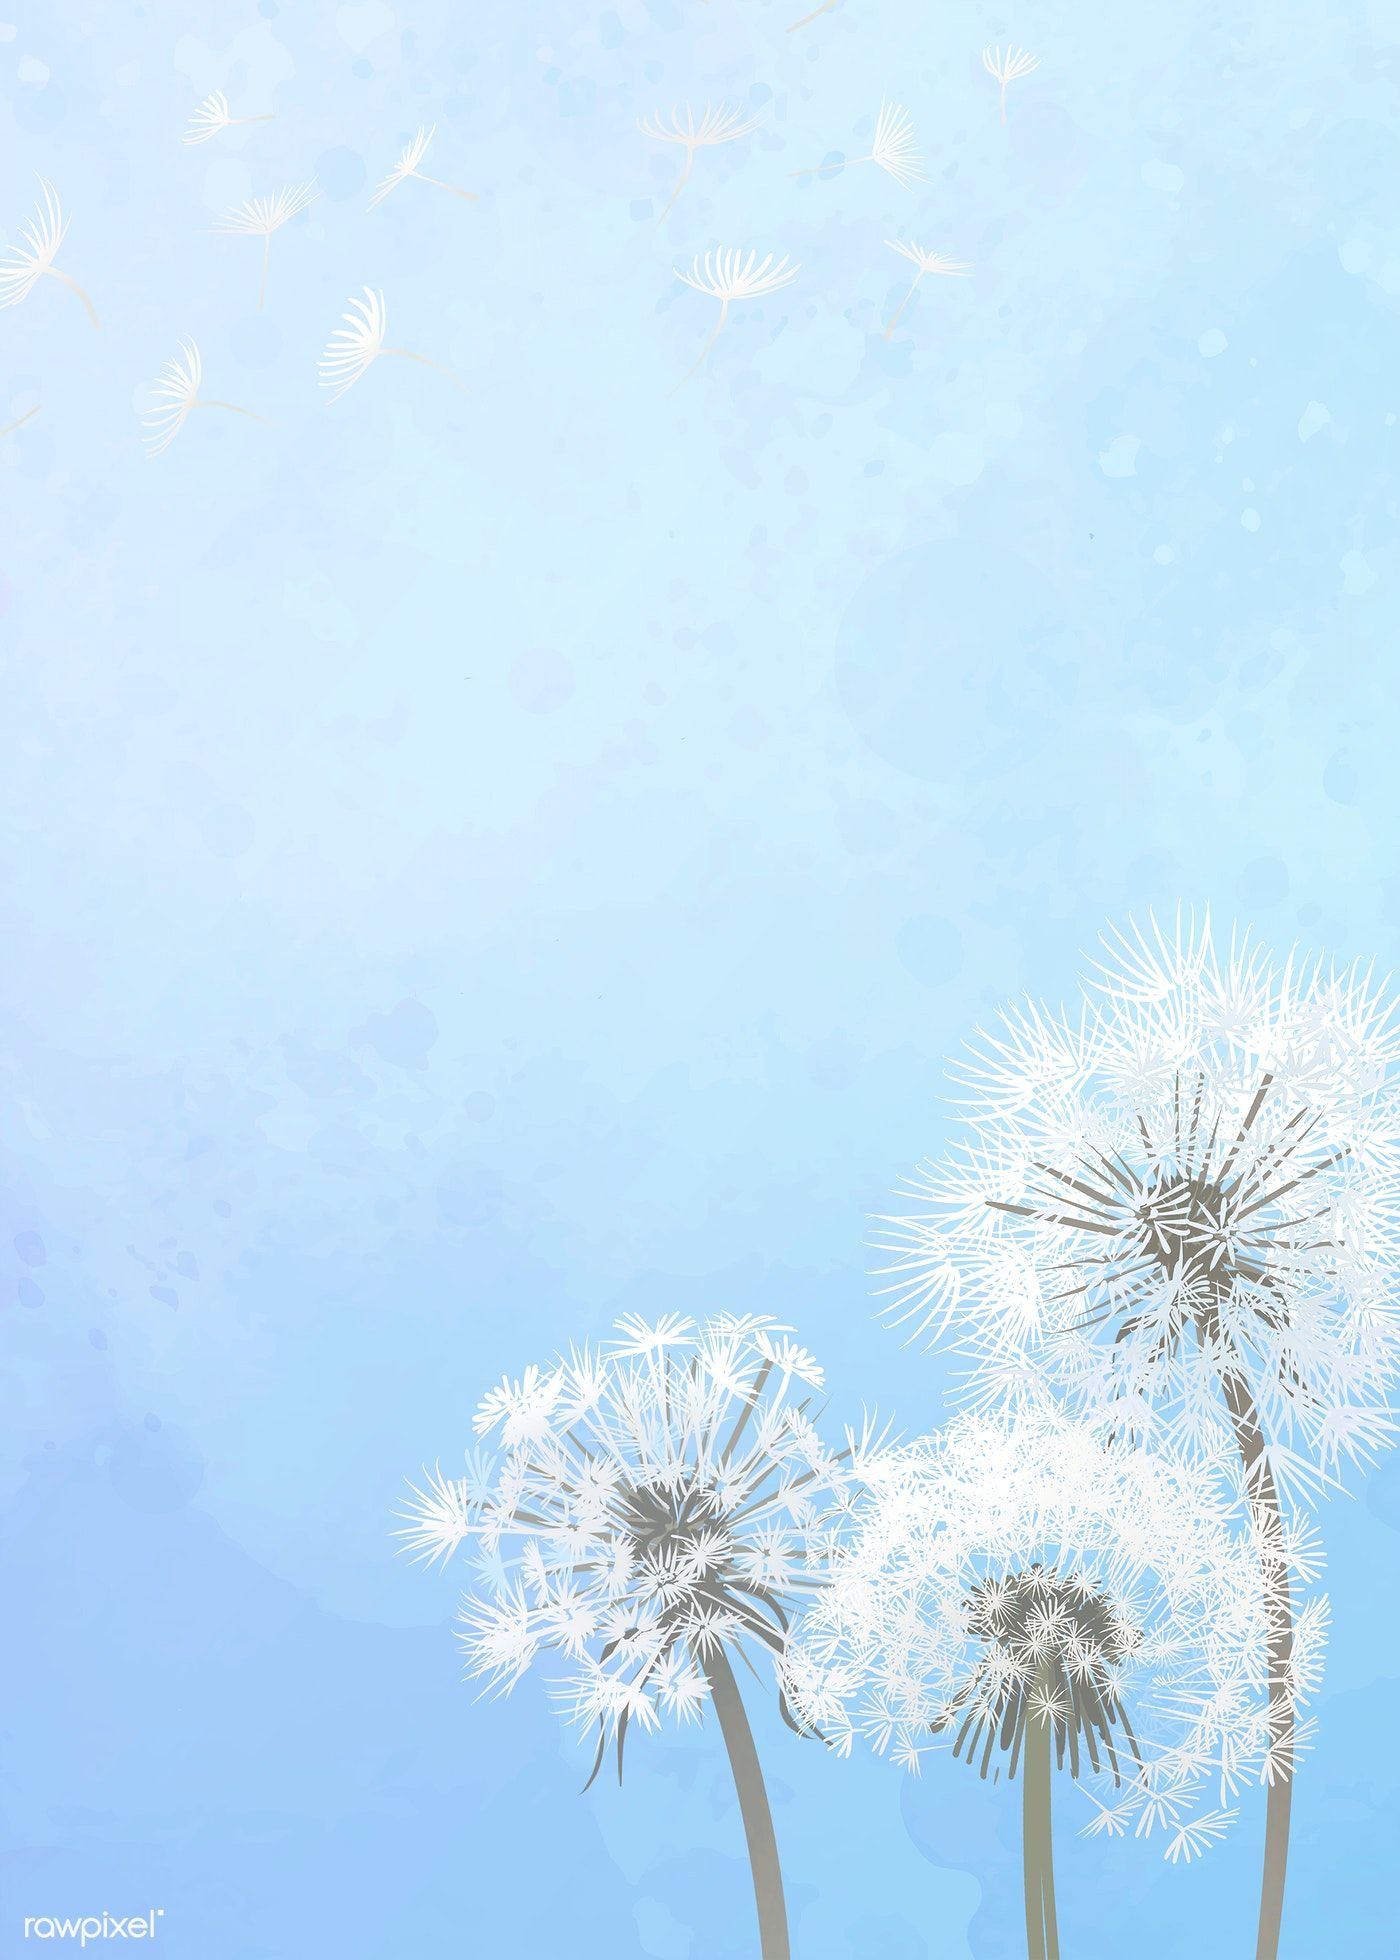 Download premium illustration of Hand drawn dandelions with a blue sky. Blue sky background, Sky anime, Sky aesthetic